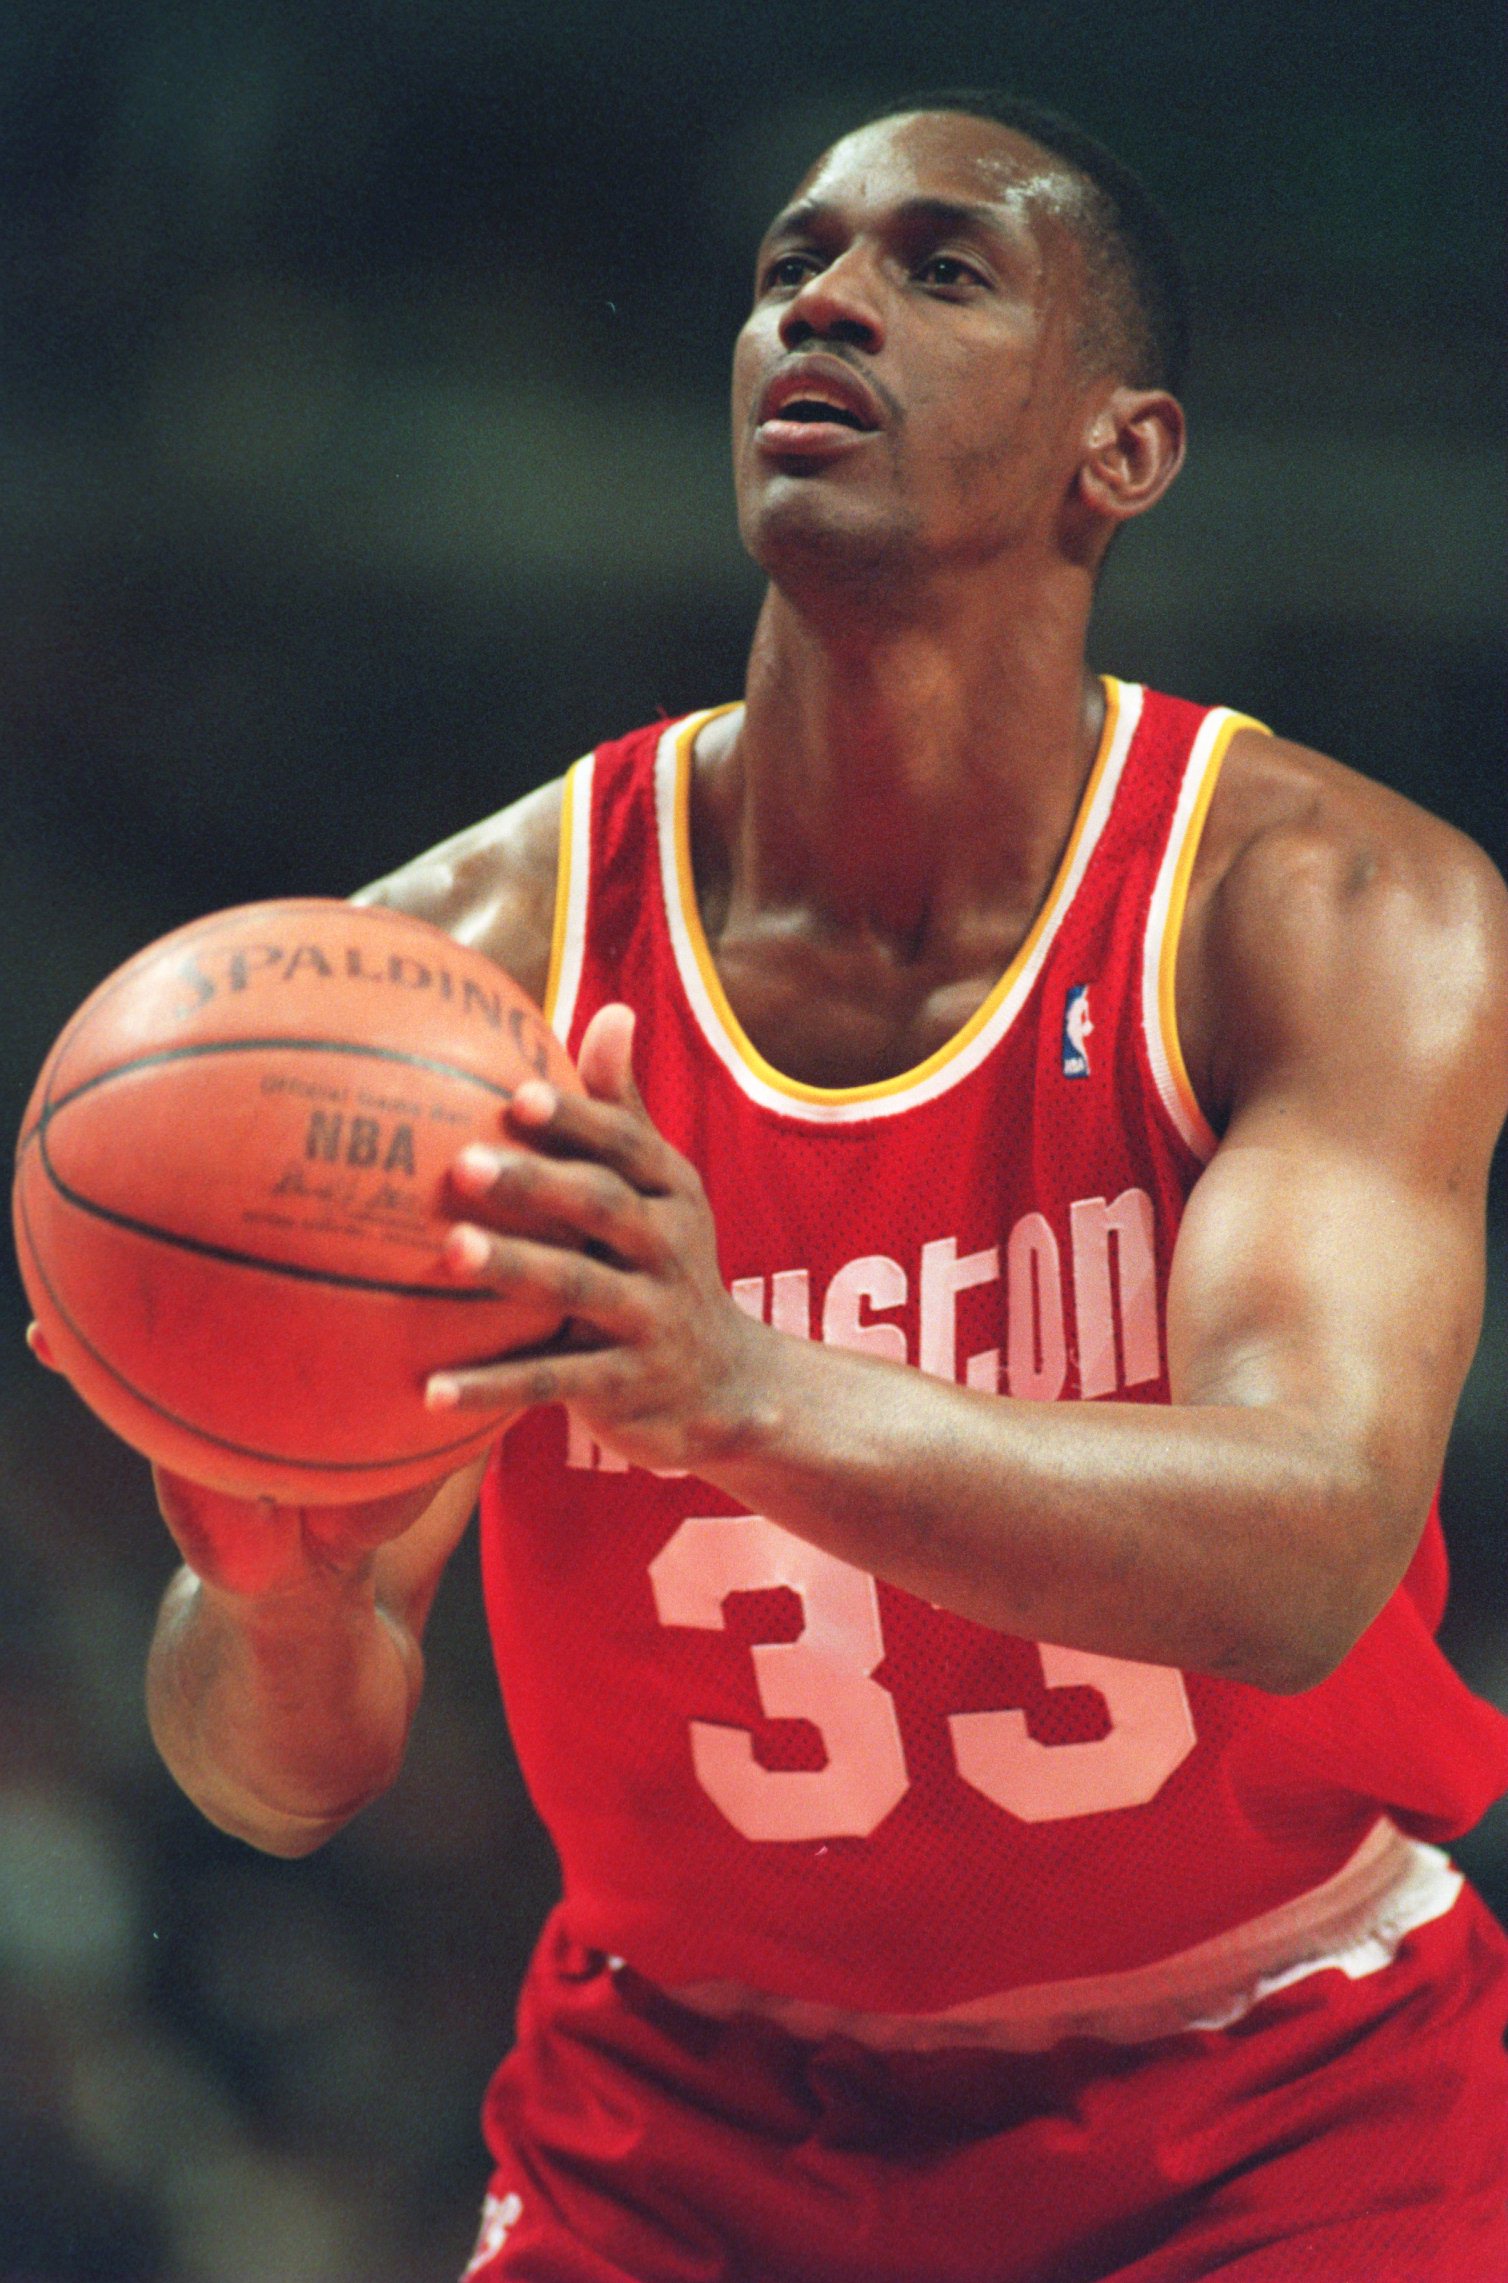 22 Jan 1995: HOUSTON ROCKETS FORWARD OTIS THORPE ATTEMPTS TO SHOOT A FREE THROUGH SHOT DURING THE ROCKETS 100-81 LOSS TO THE CHICAGO BULLS.